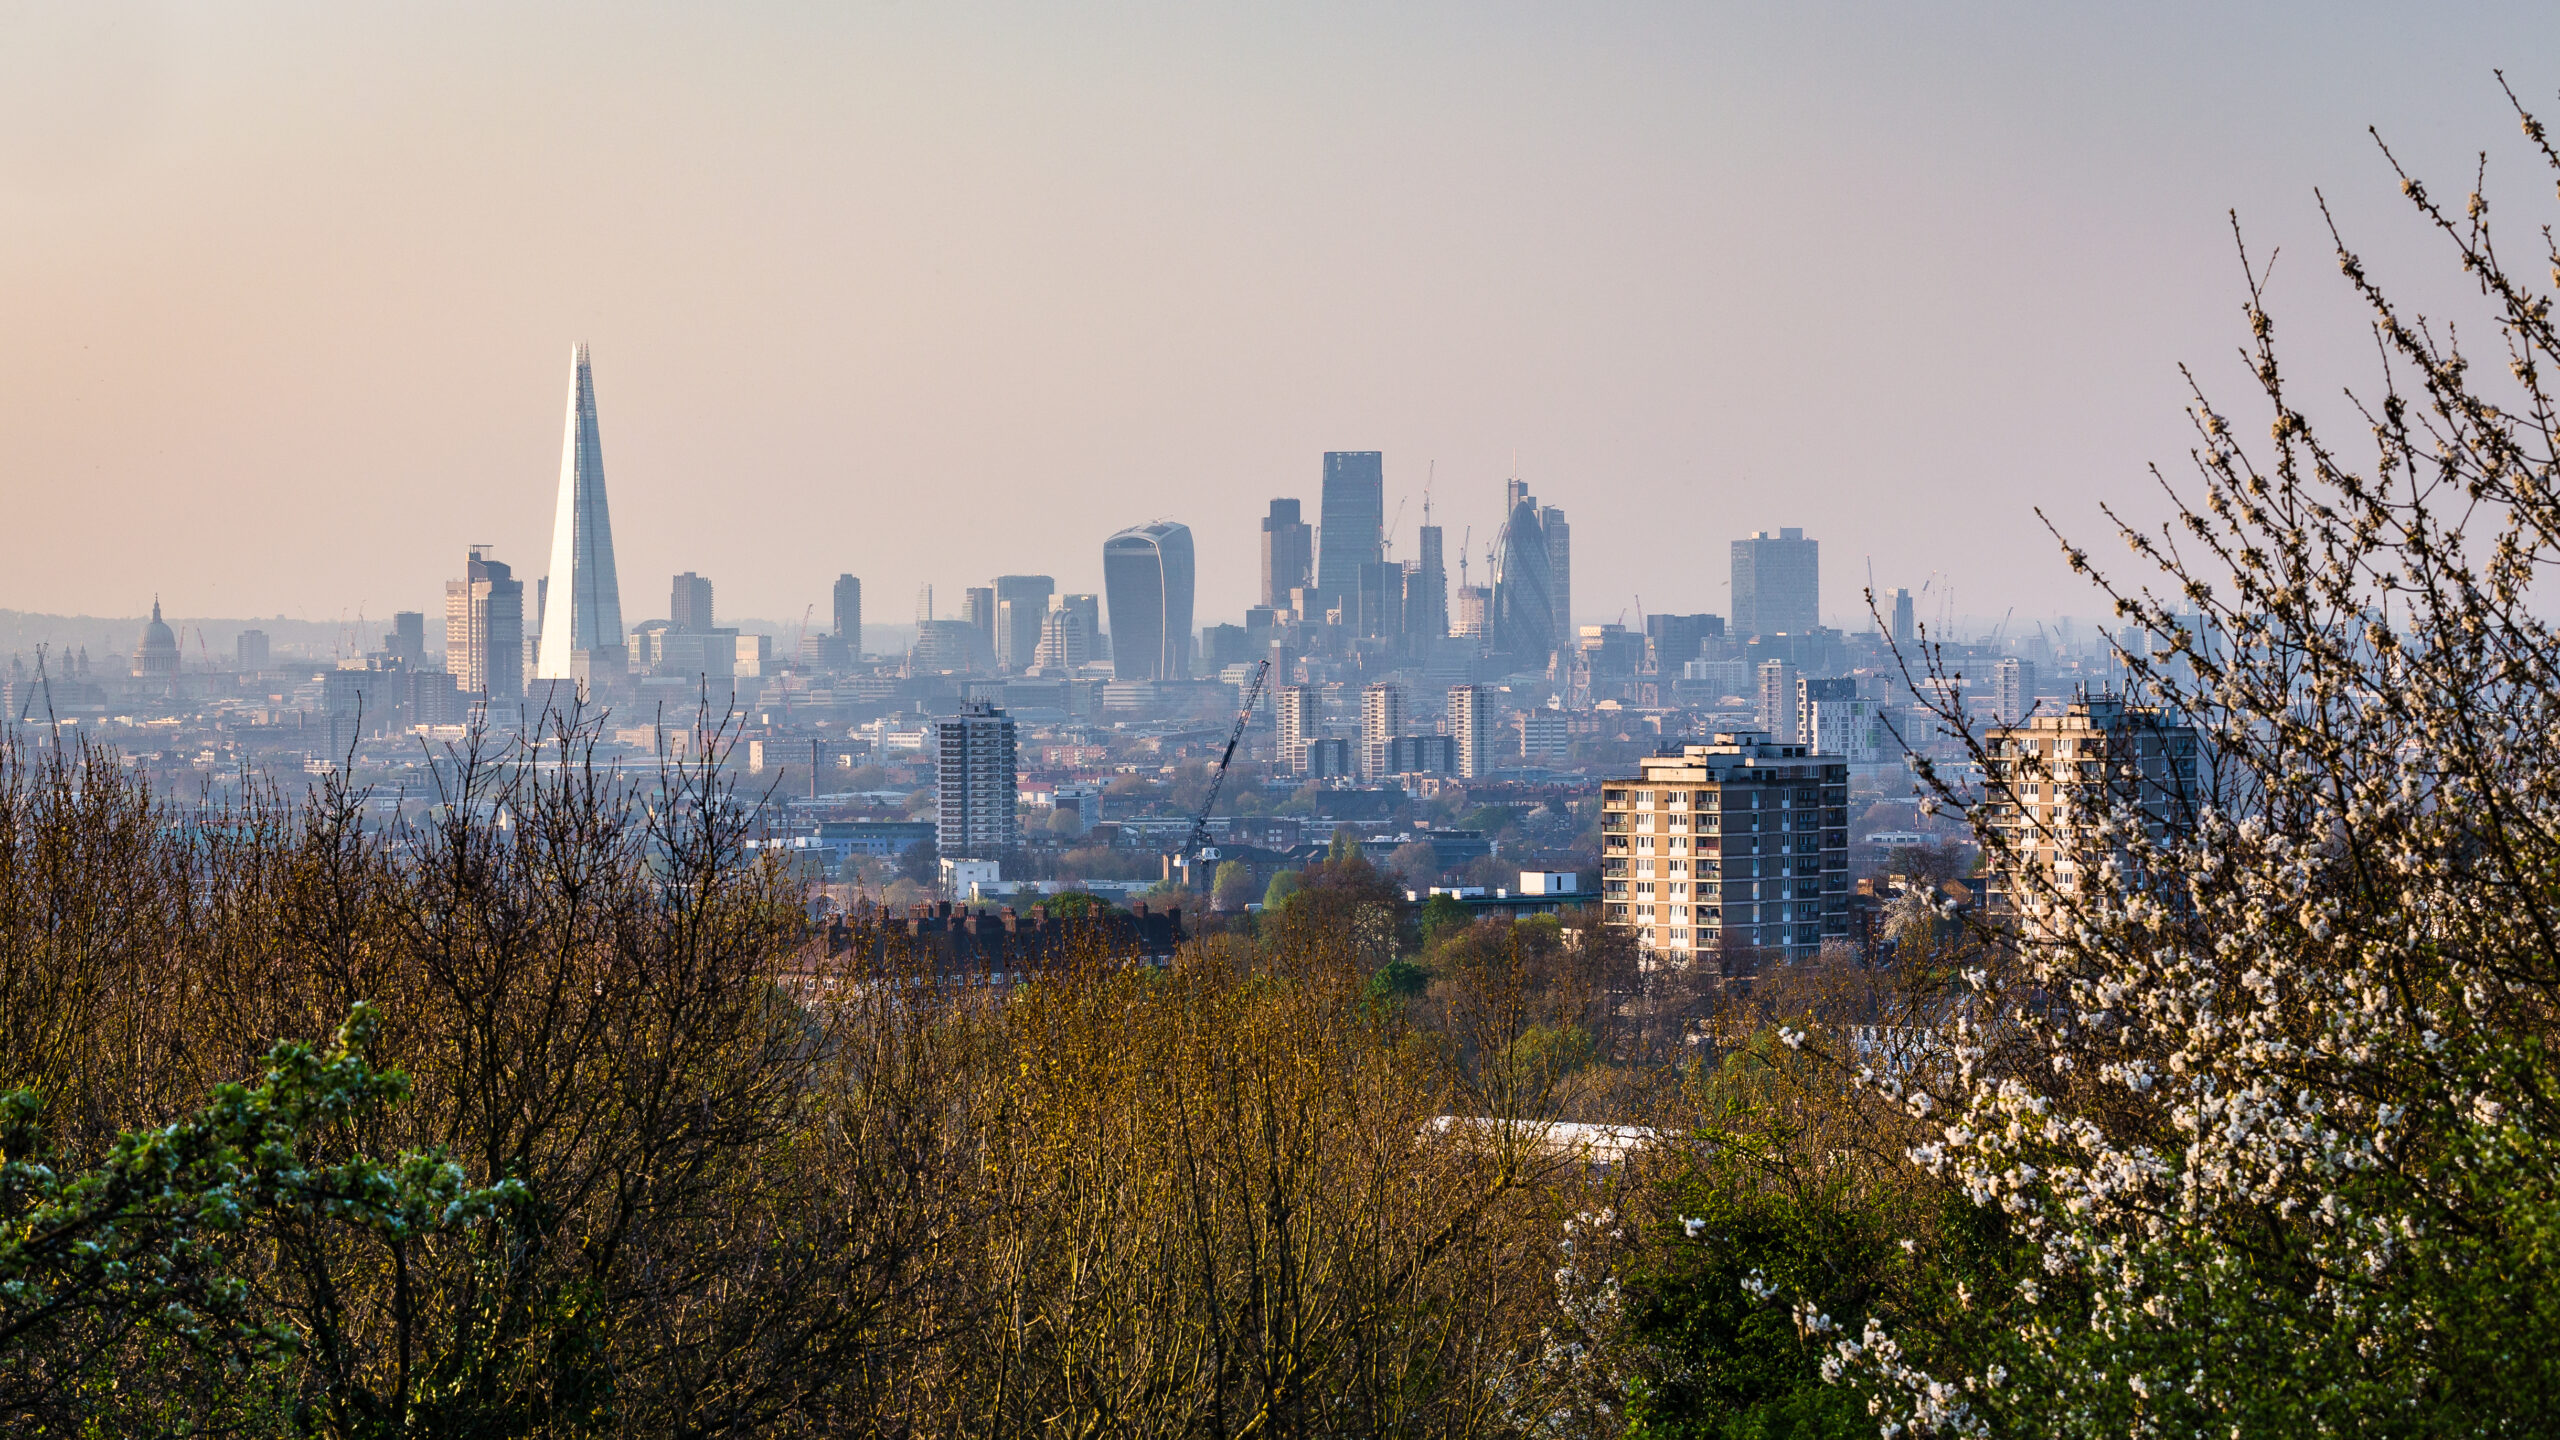 View over London's city centre from One Tree Hill in South-East London